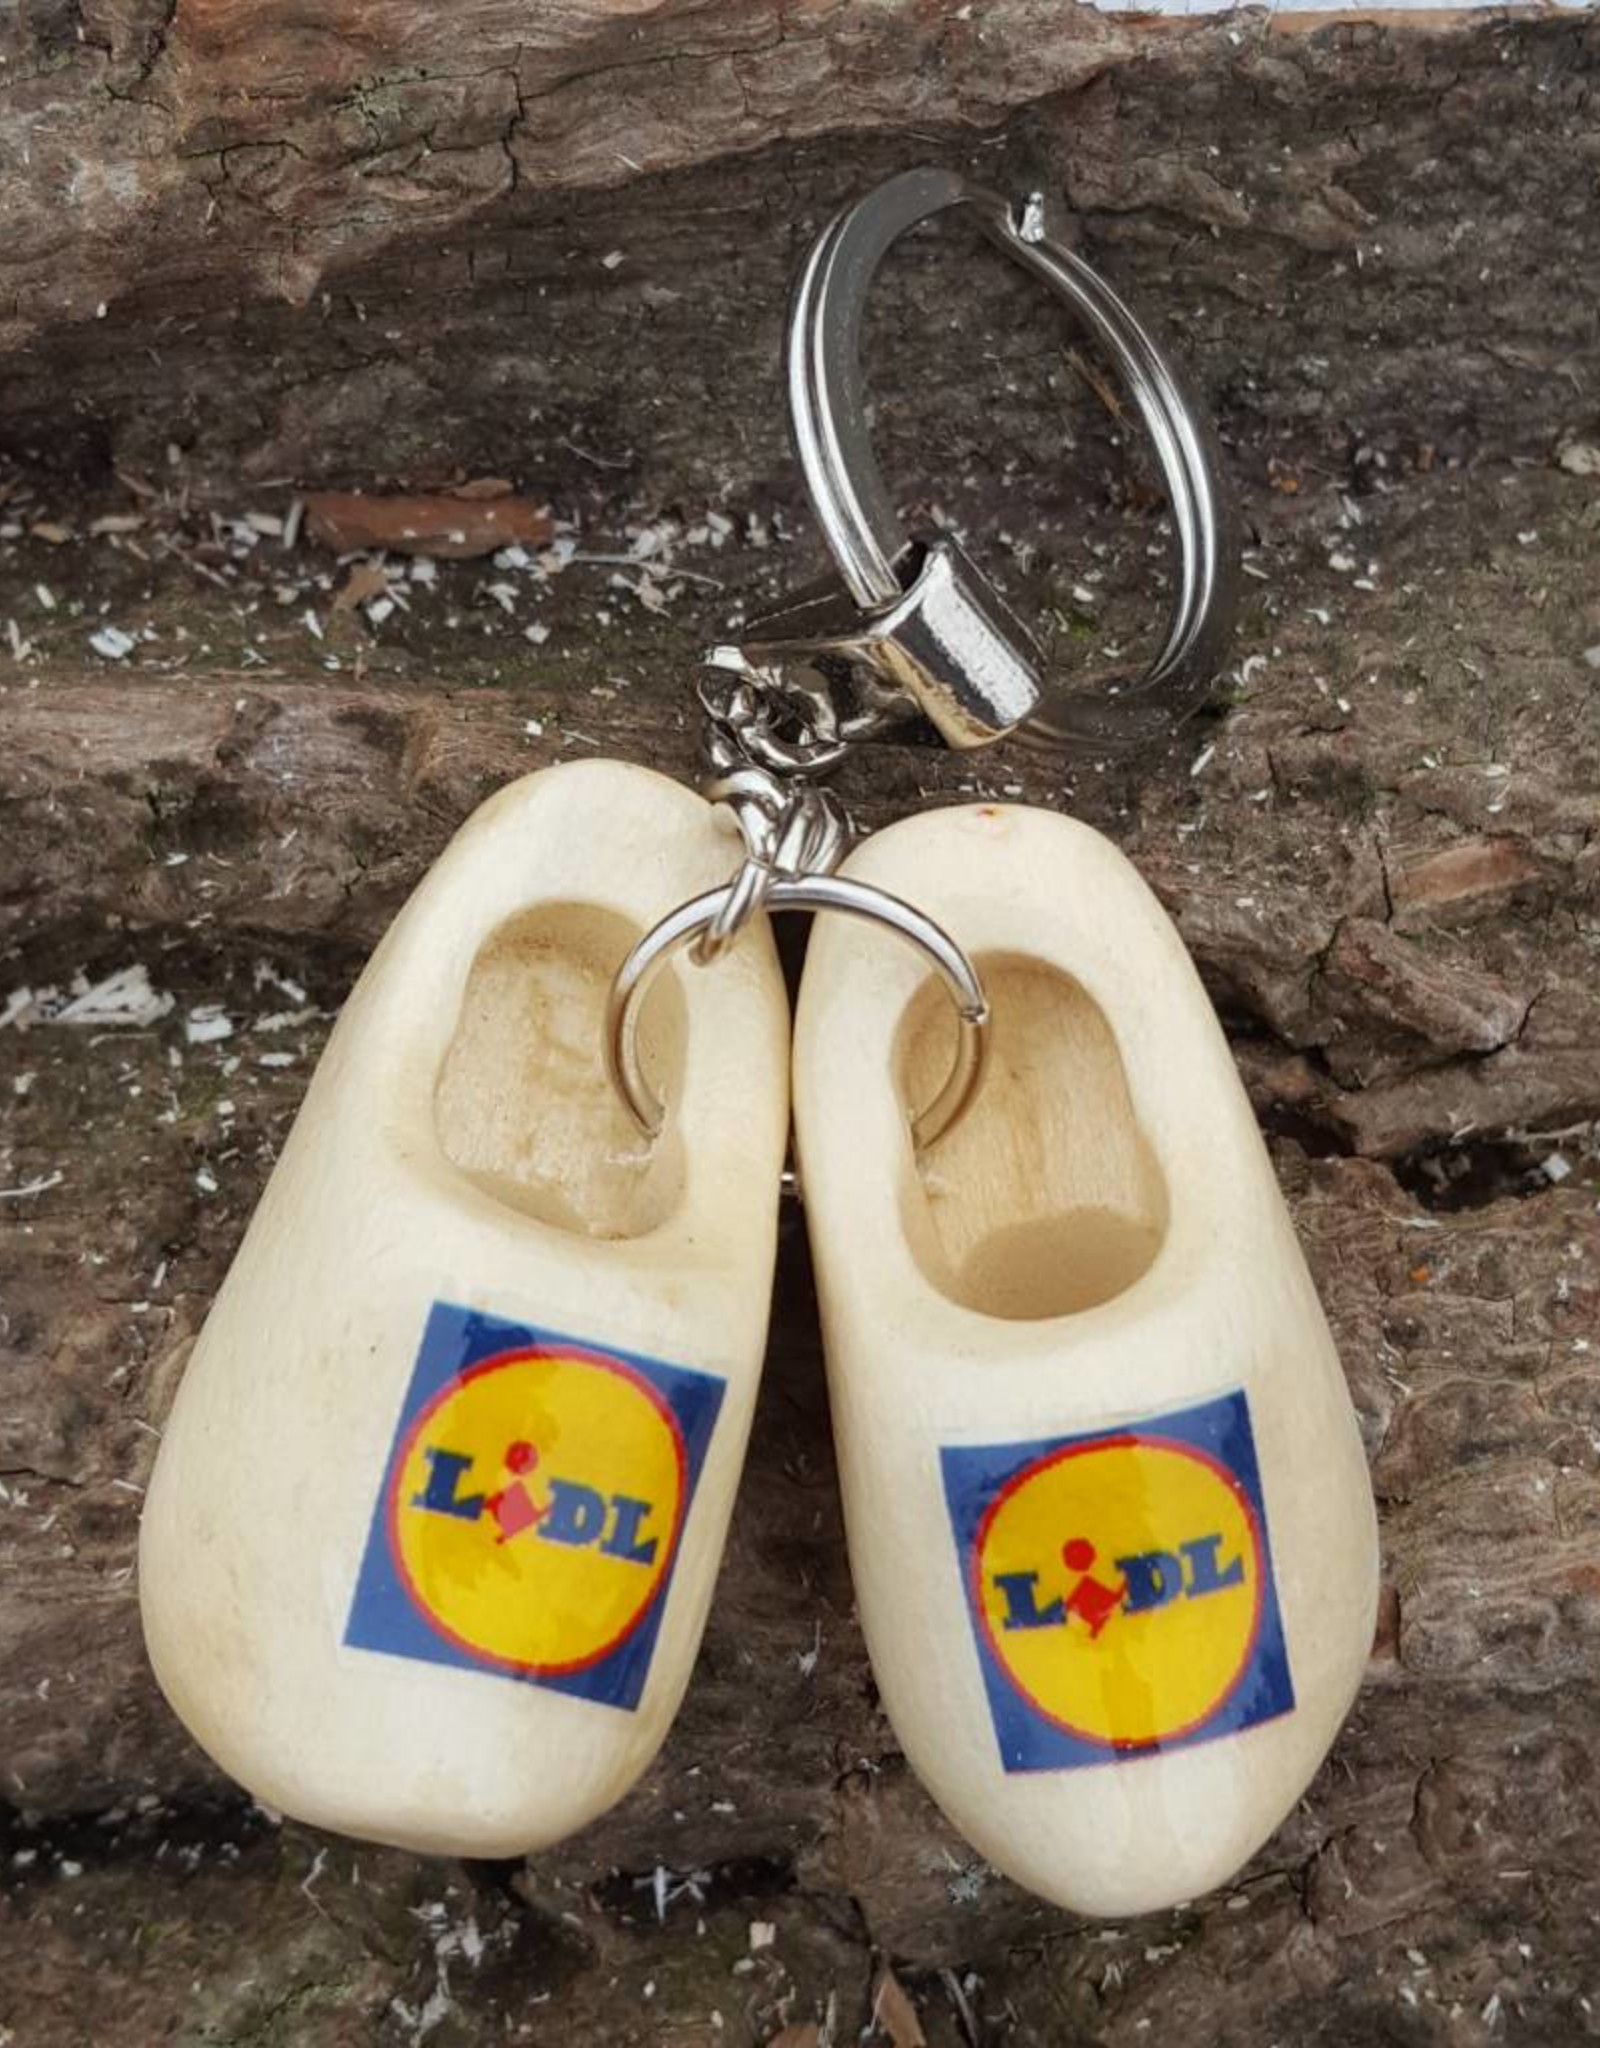 woodenshoe pair keyhanger with logo or text